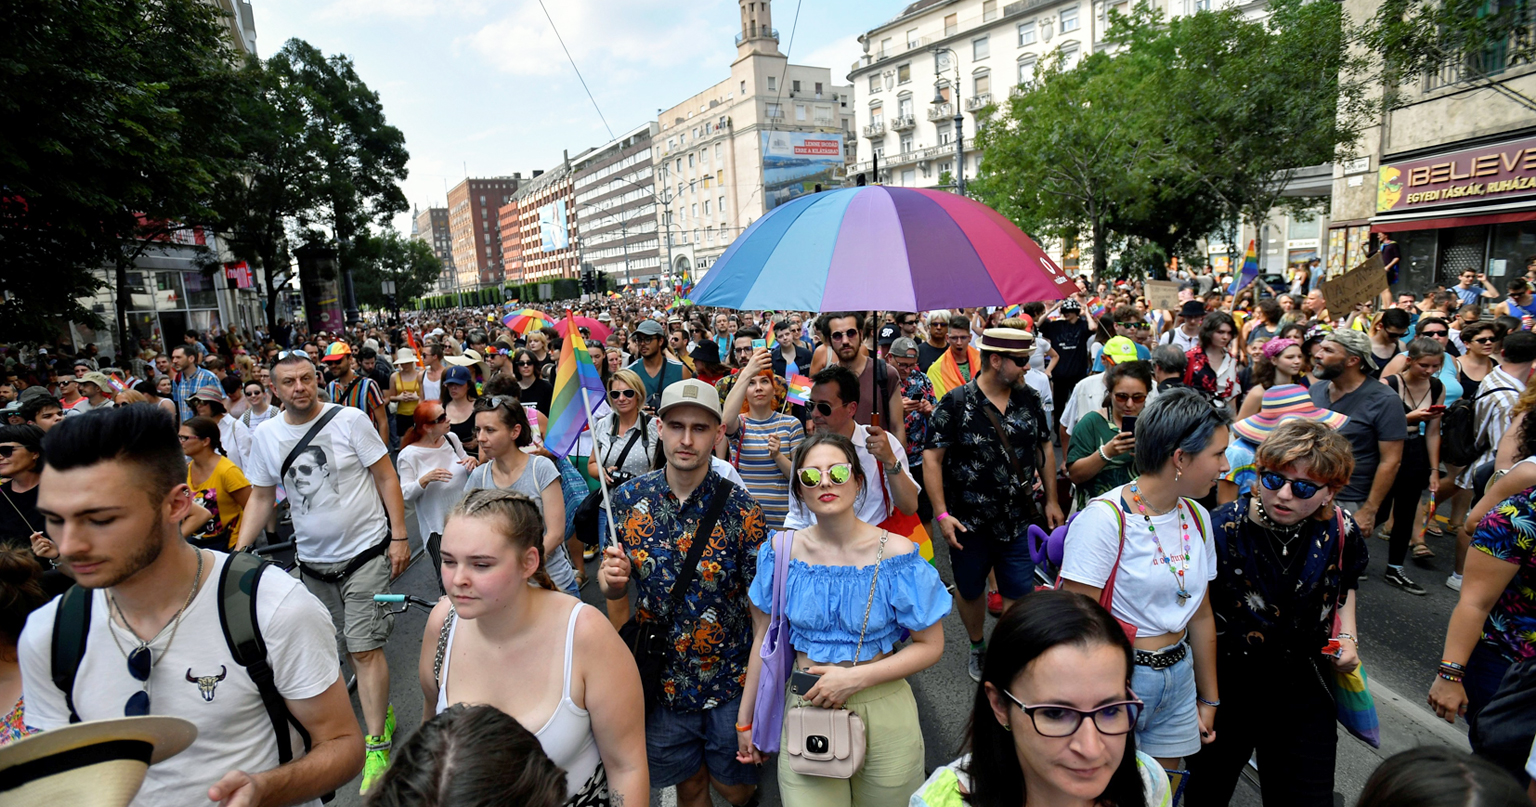 Crowds of people in a Pride march